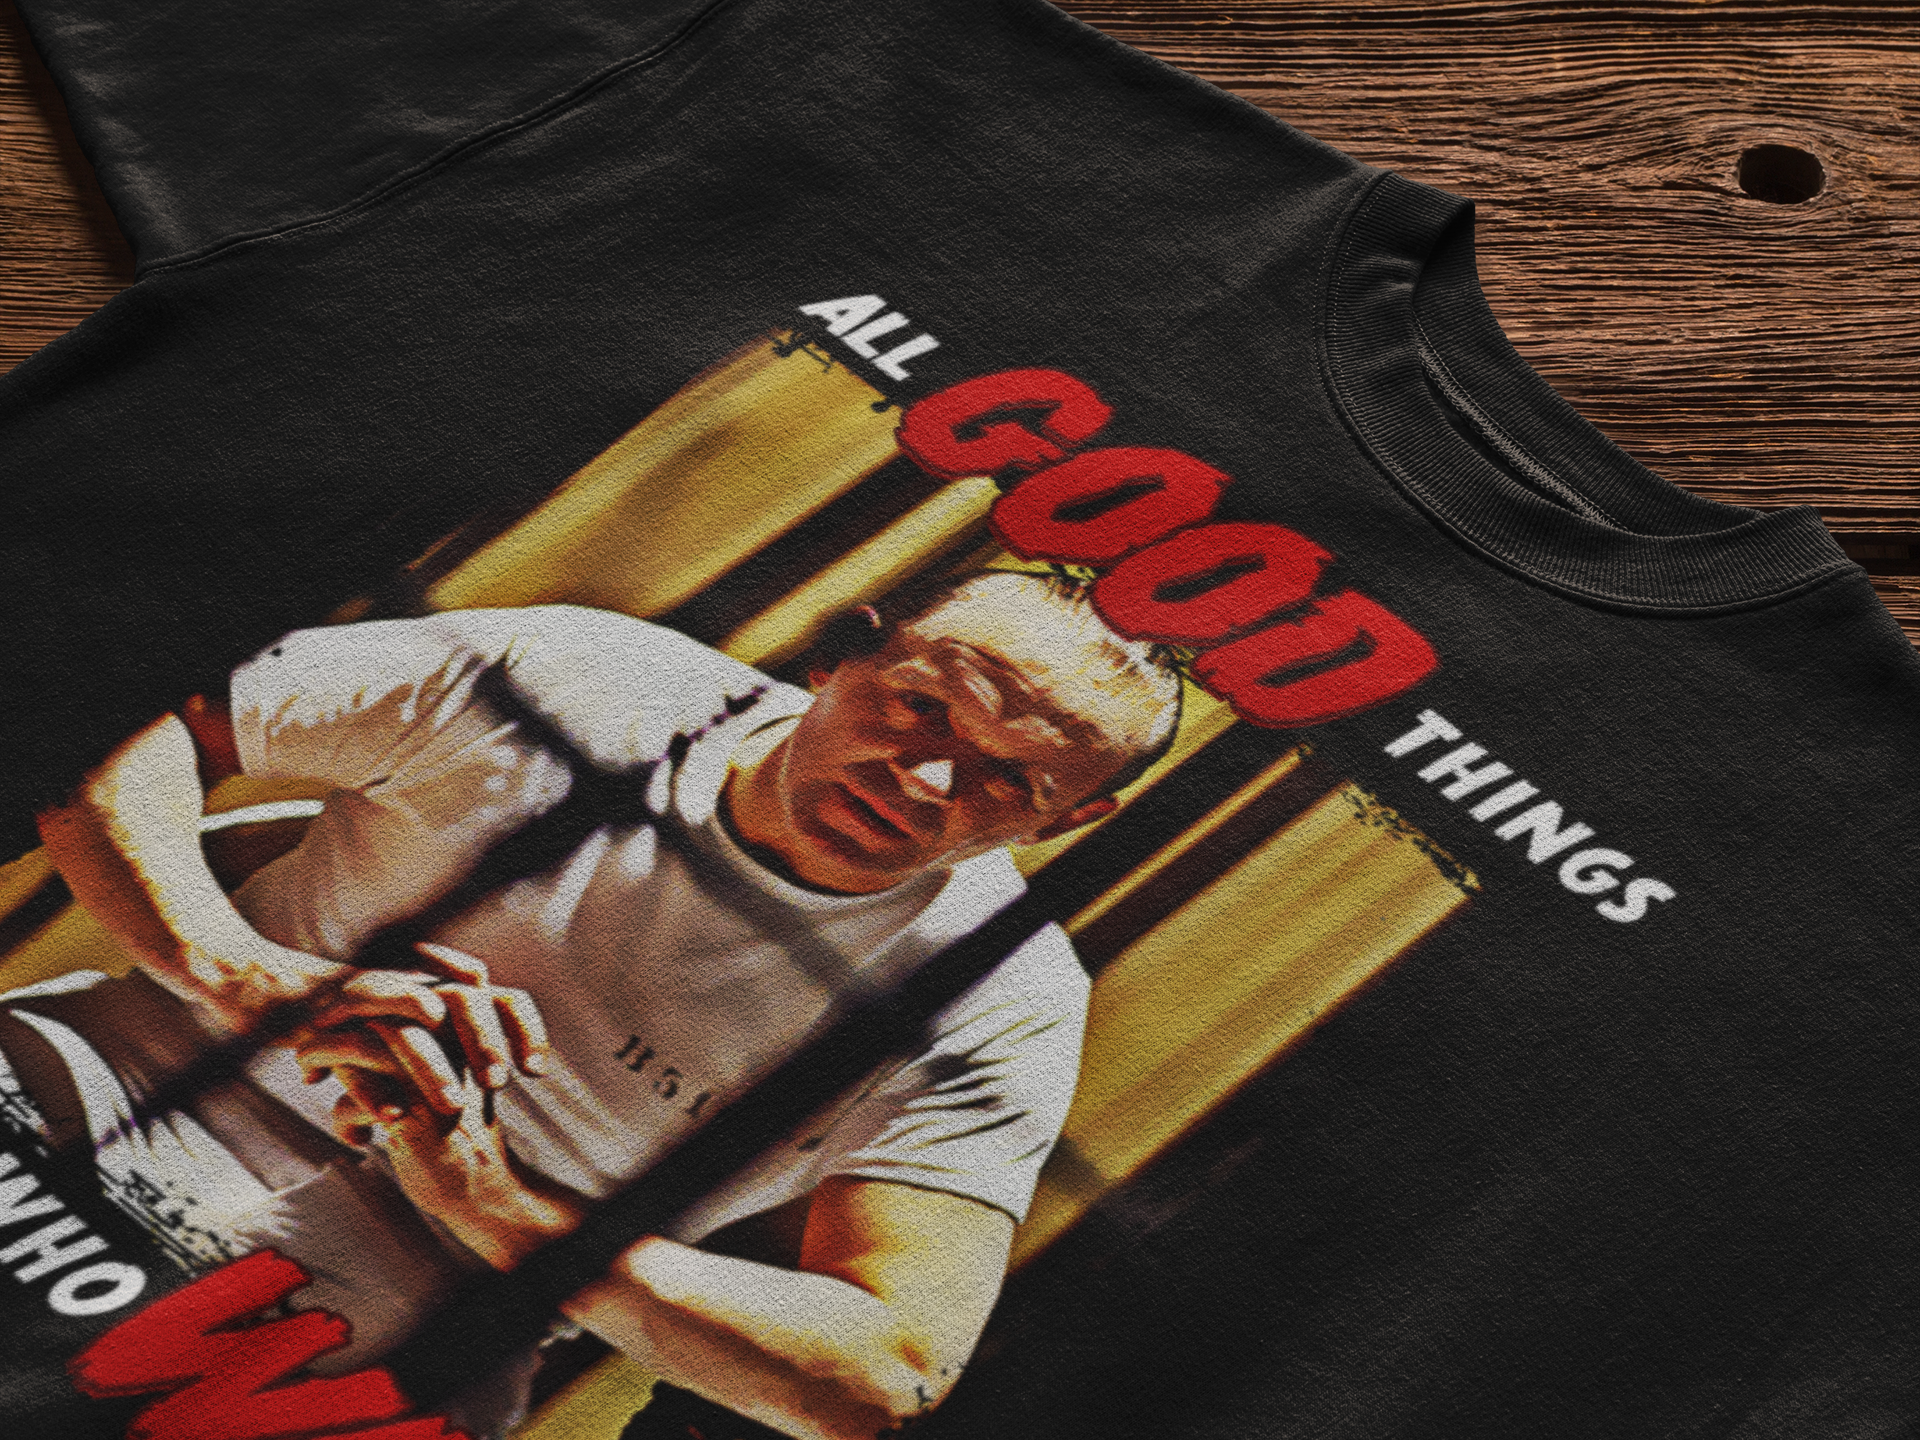 Hannibal 'The Cannibal' T-Shirt - Hellwood Outfitters